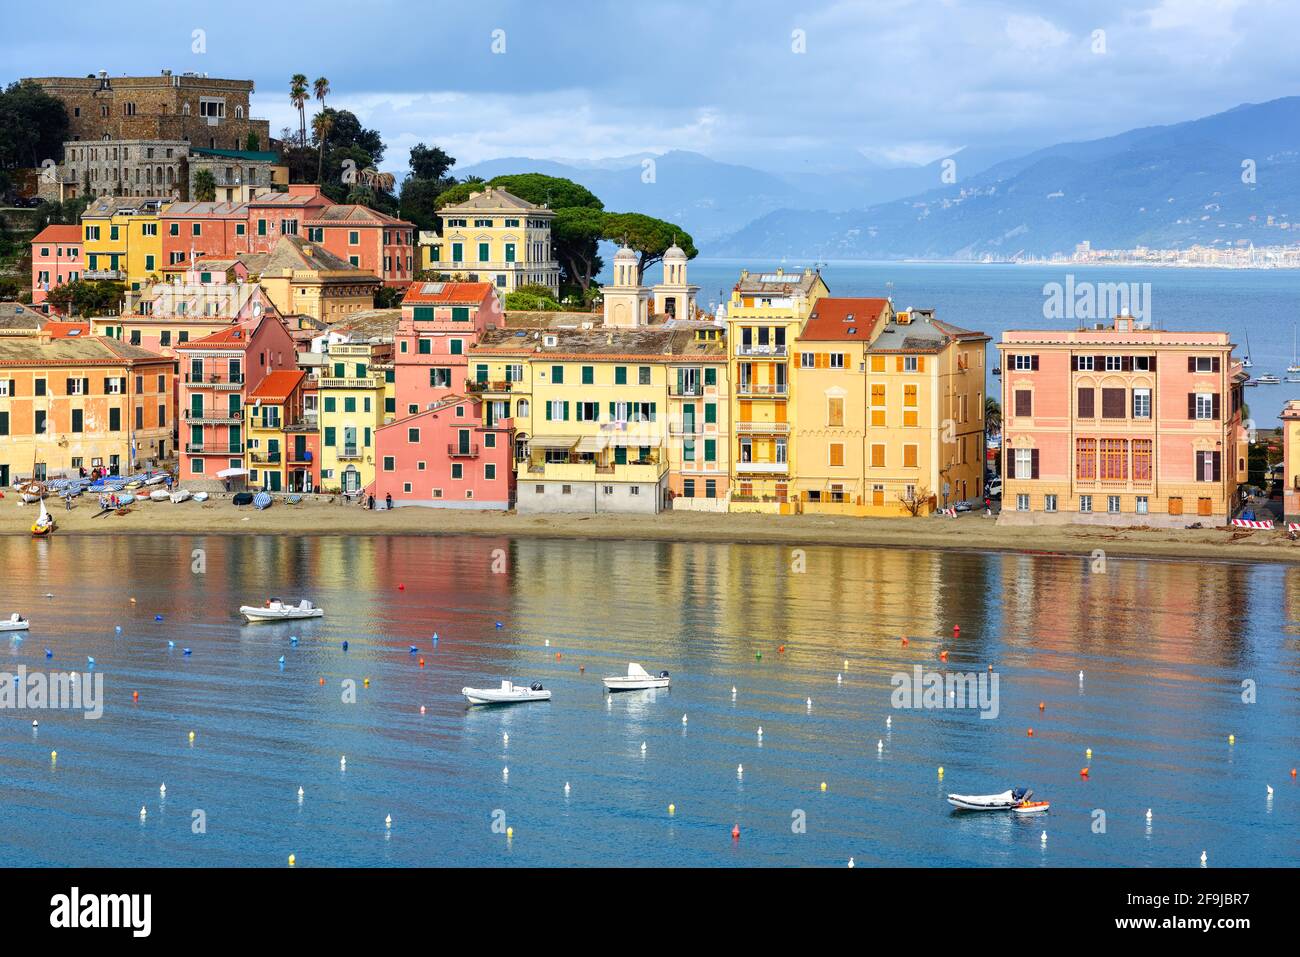 Colorful traditioanal houses in the Bay of Silence in the Old town of Sestri Levante, Mediterranean sea coast of Liguria, Italy Stock Photo